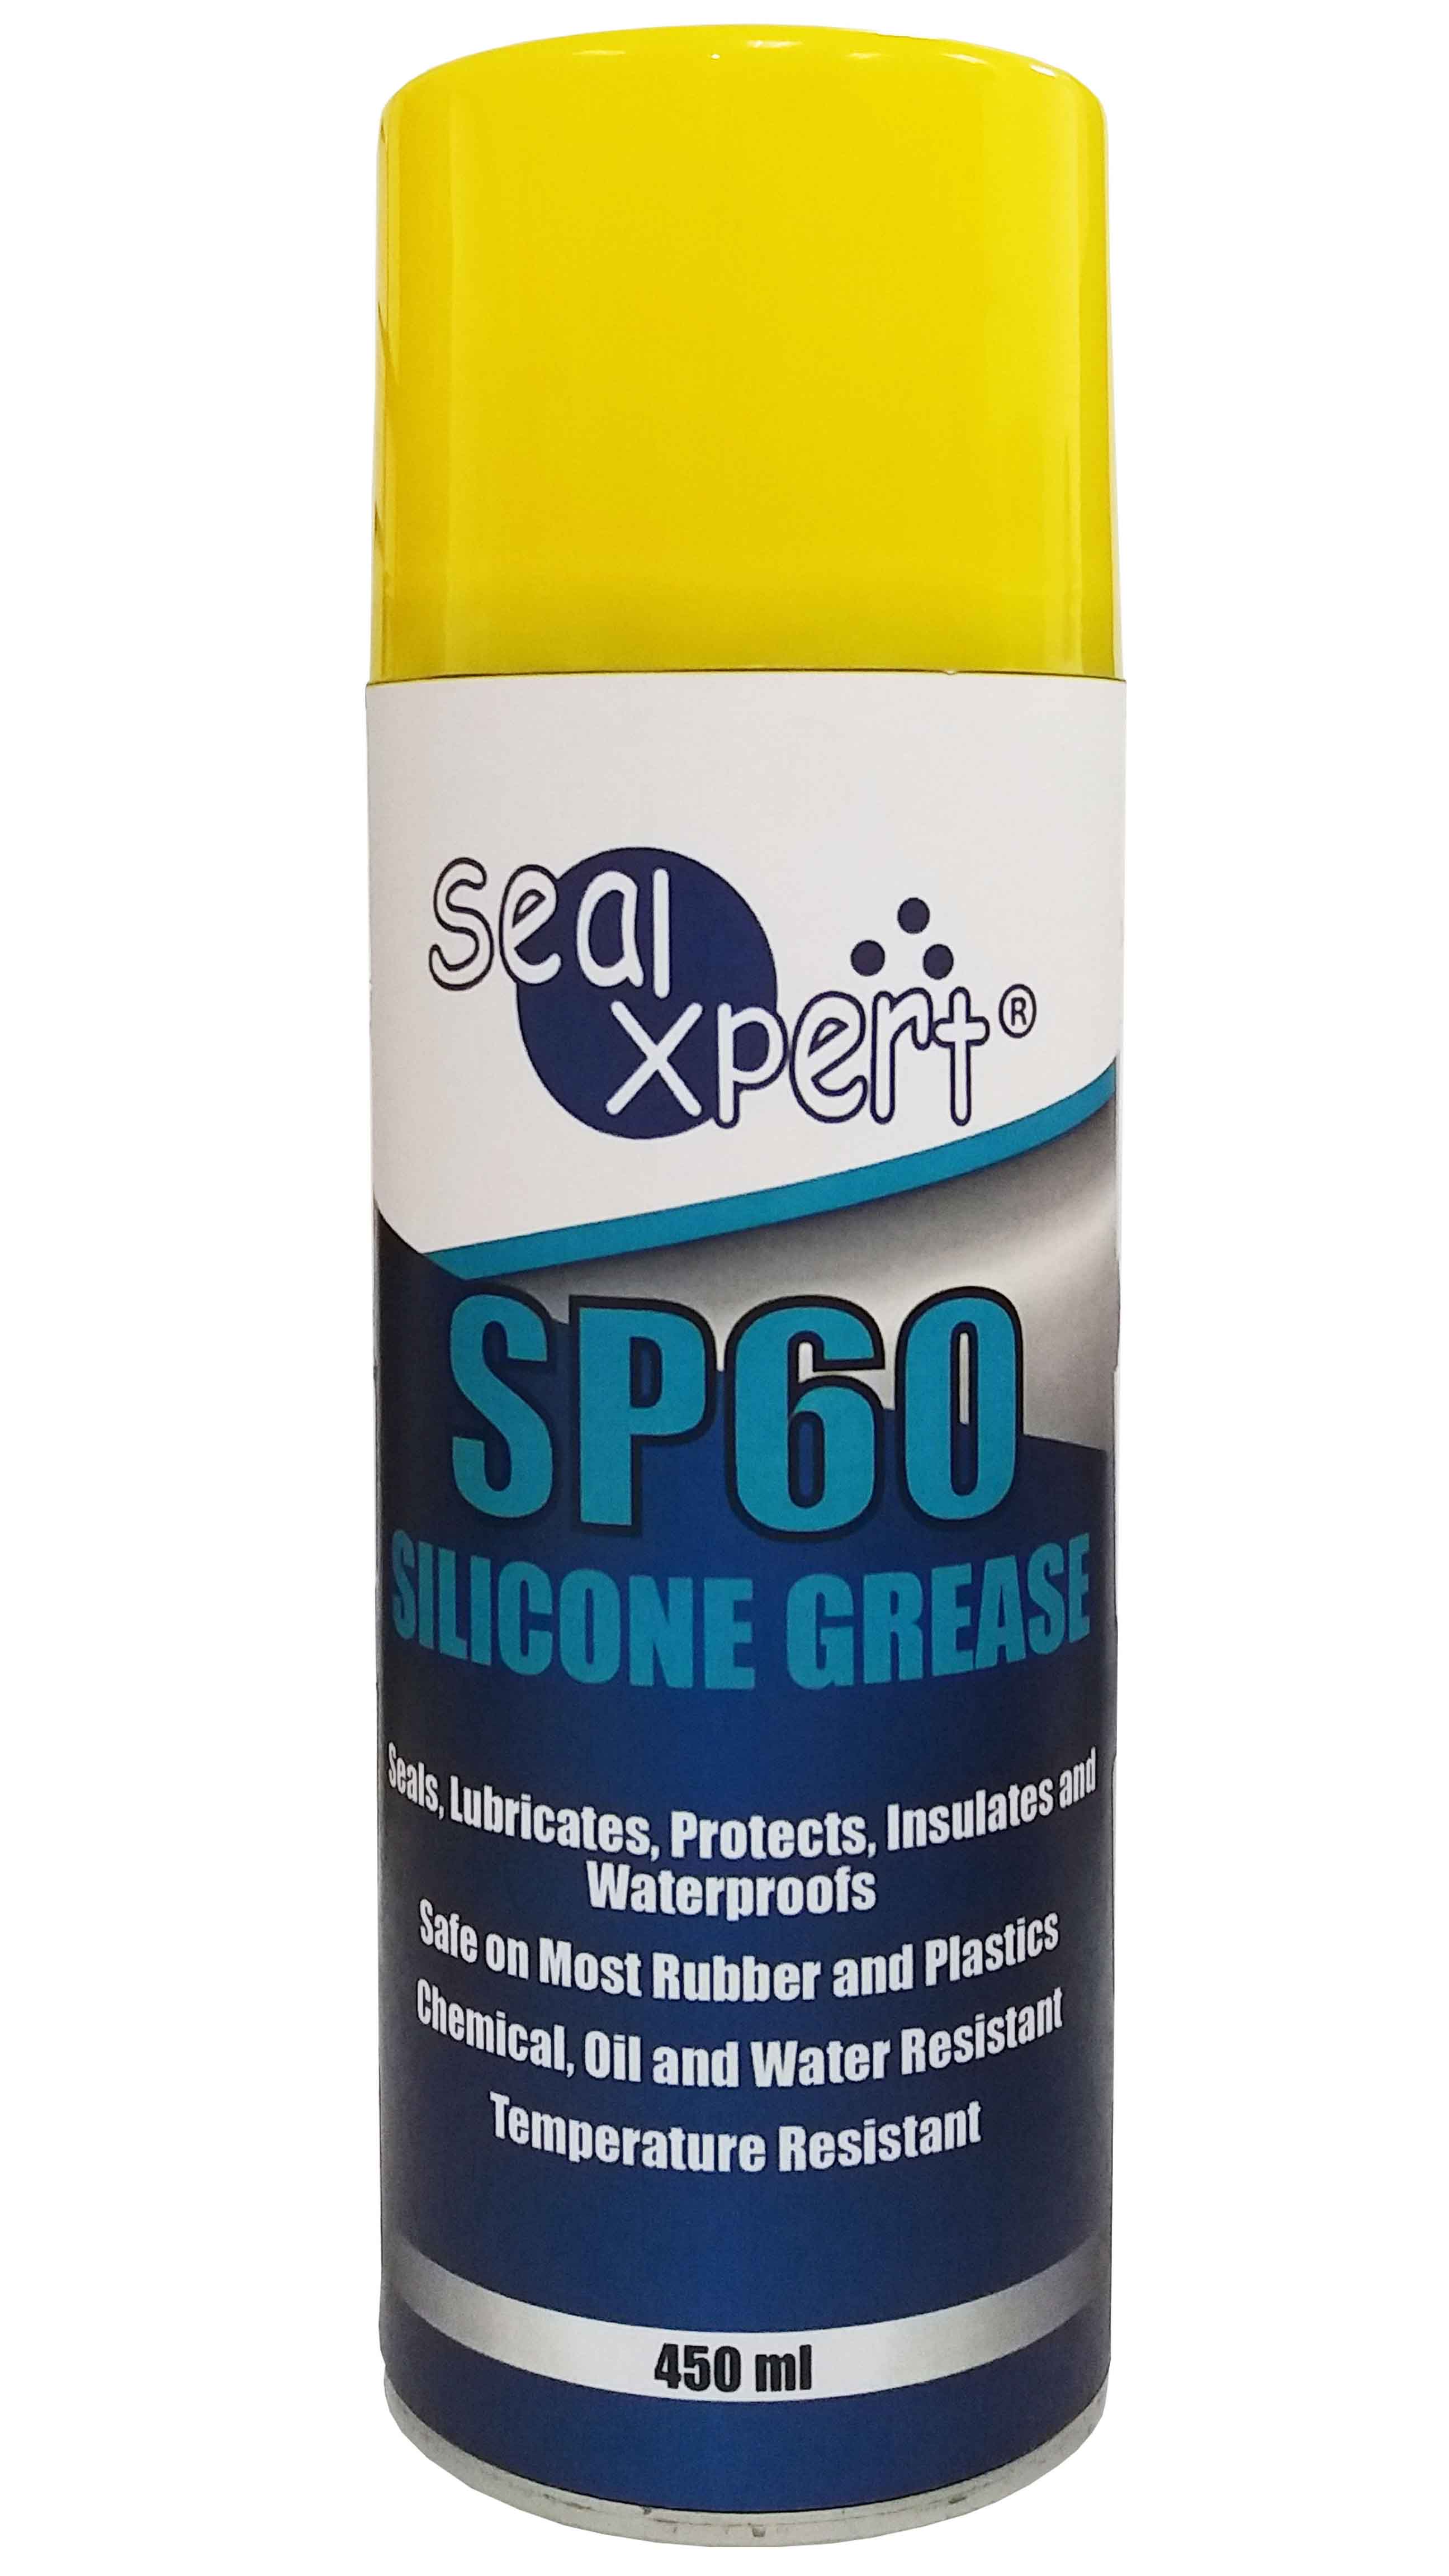 5912 SP60 Silicone Grease - AEROSOL PRODUCTS (ID)